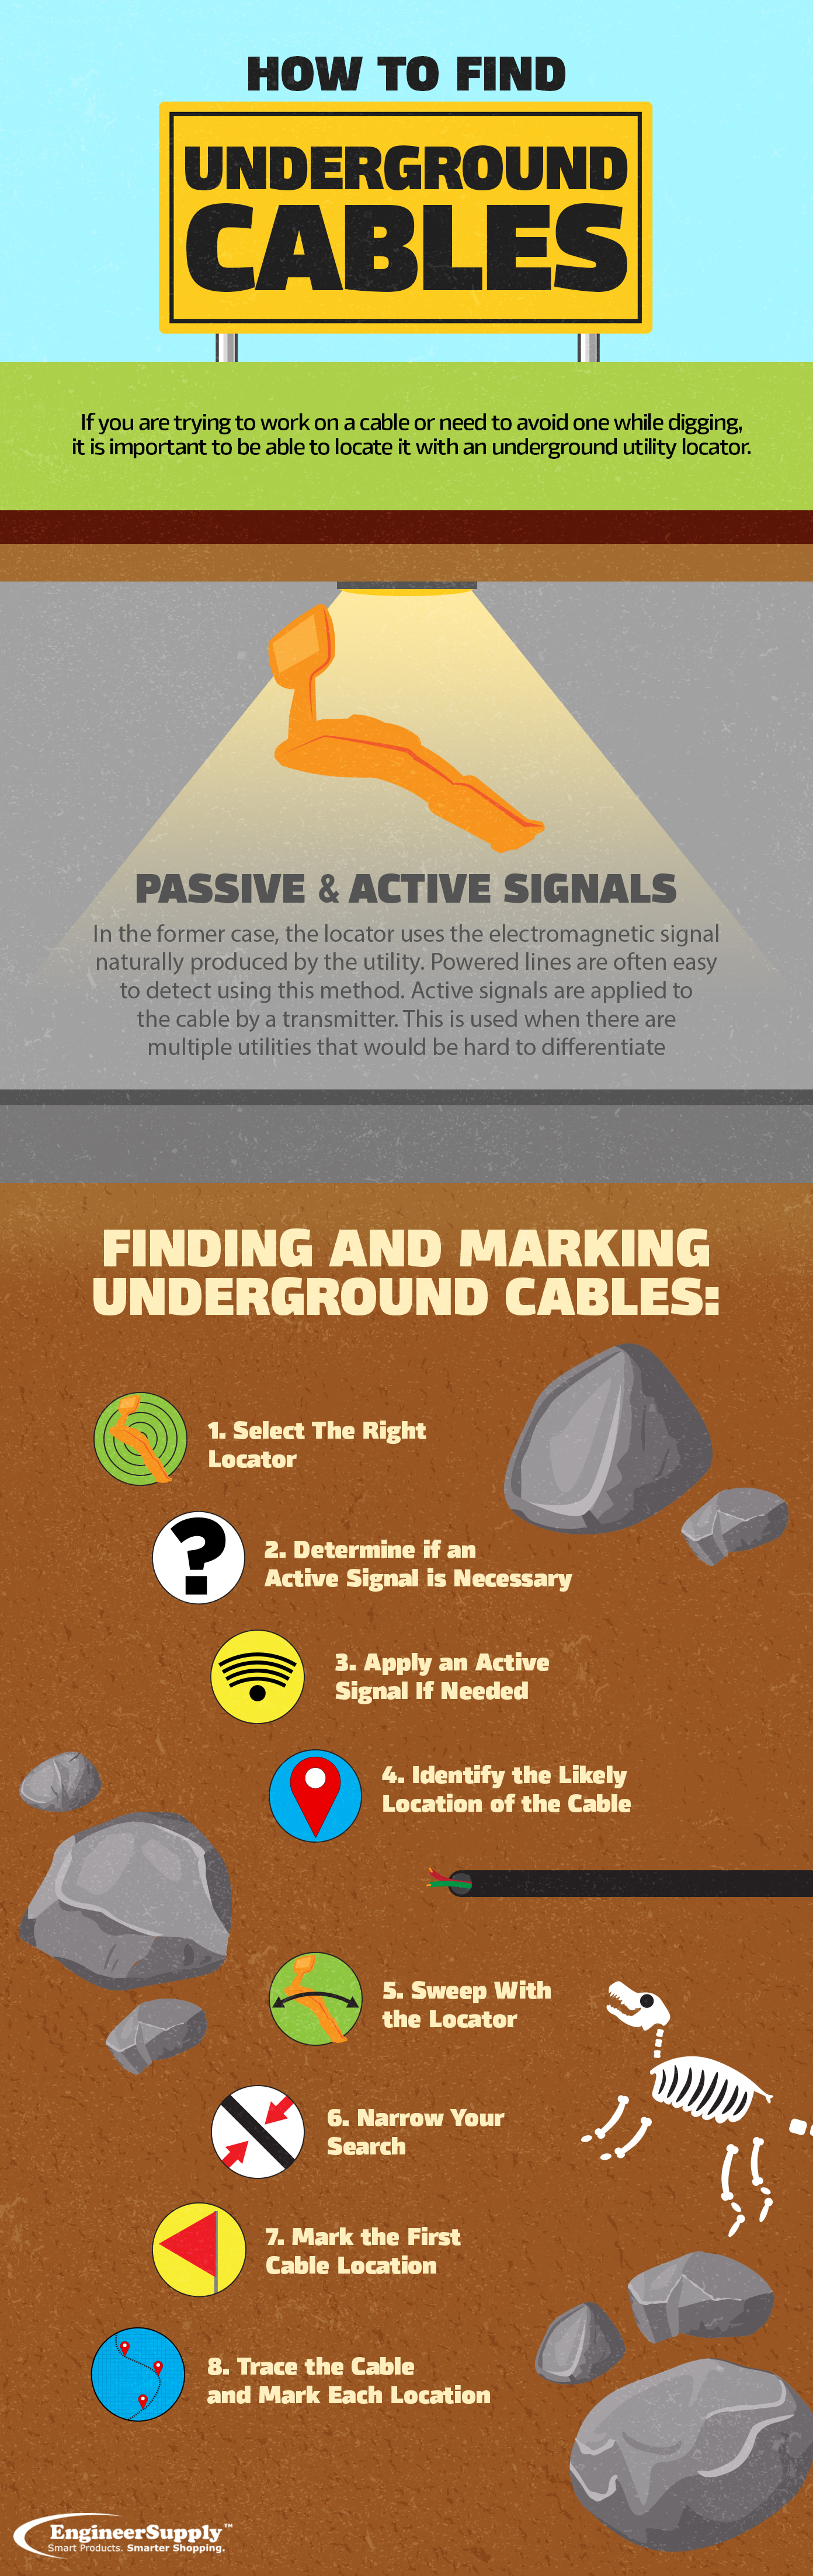 finding underground cables infographic